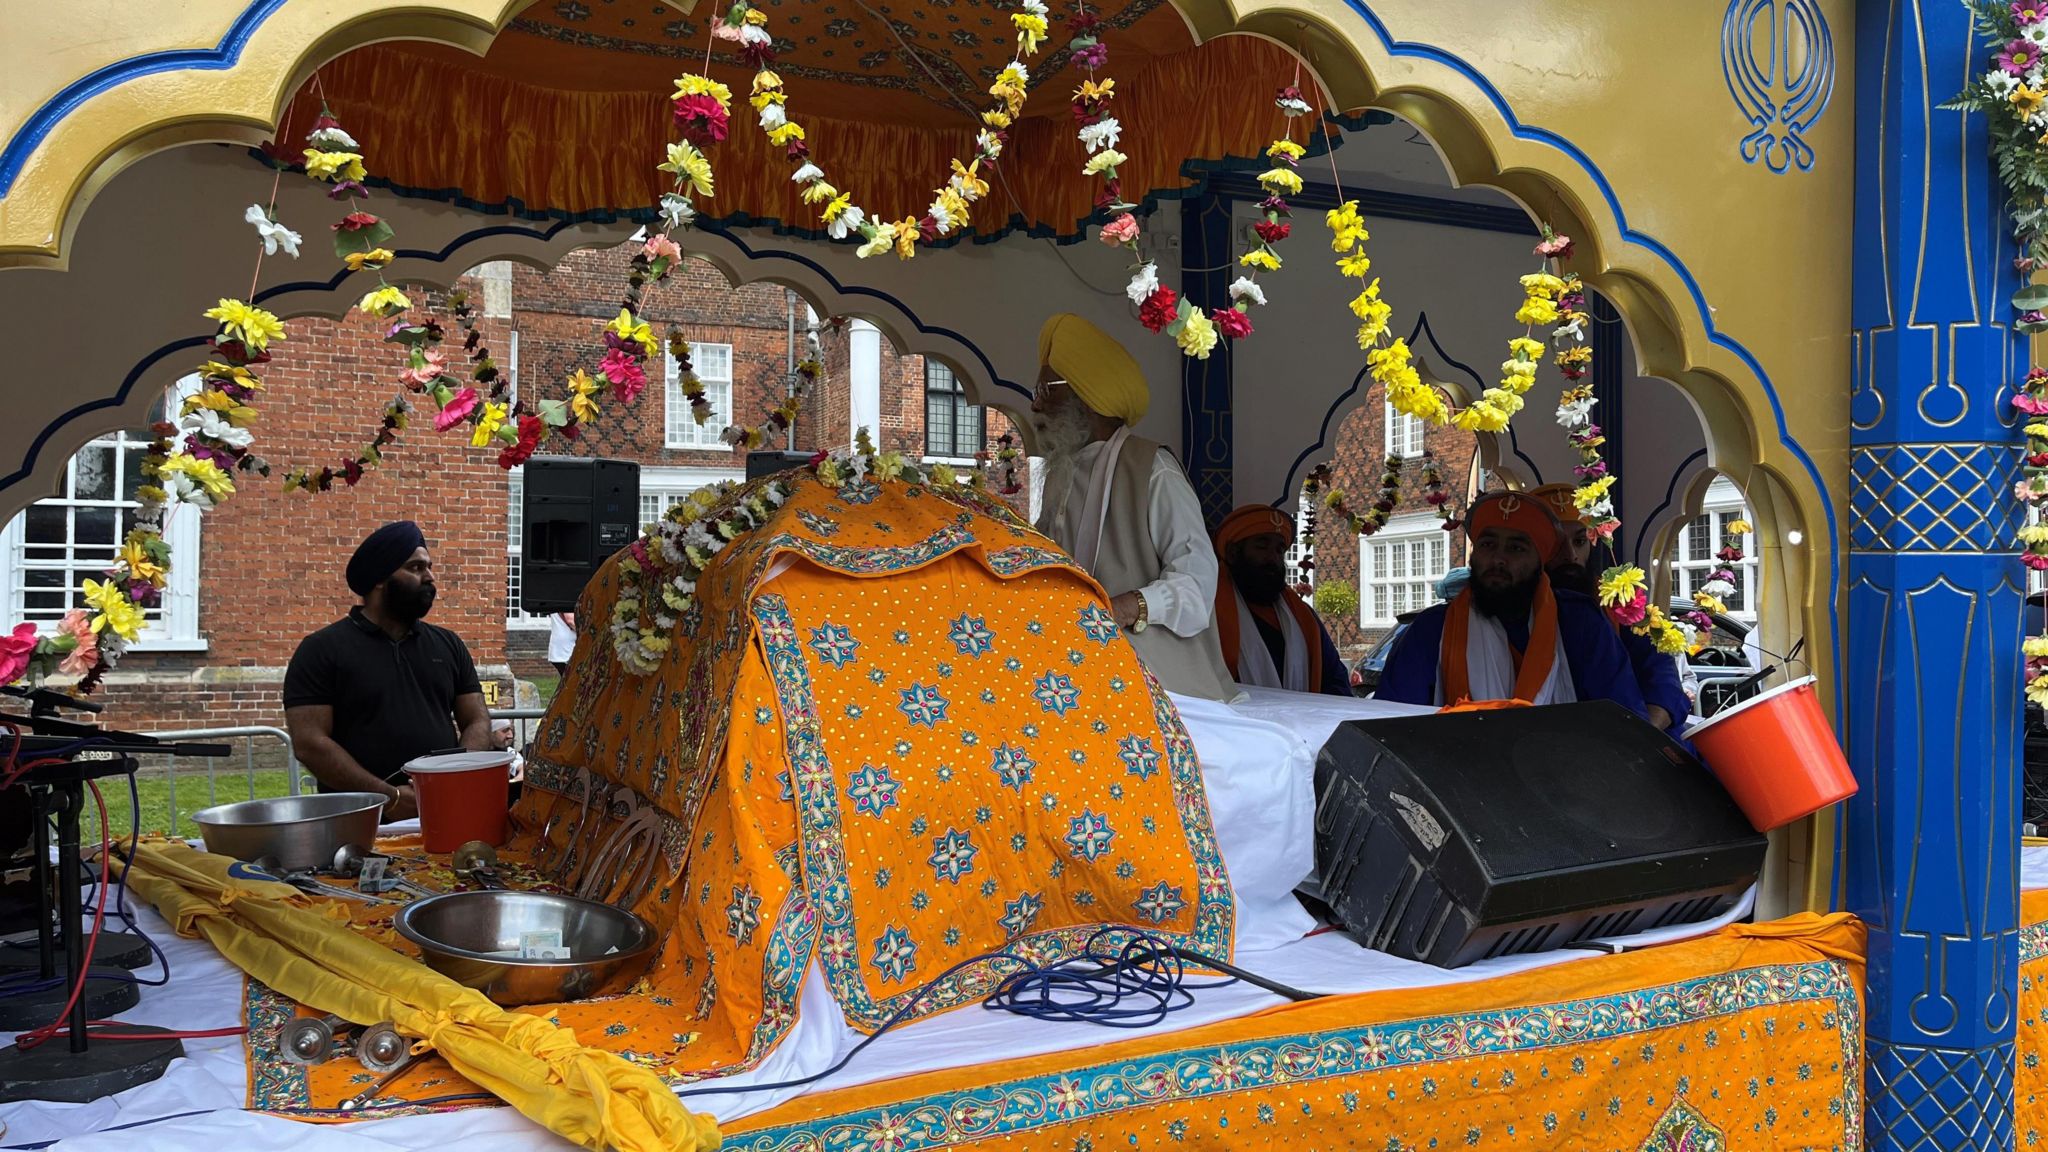 A float with flowers and orange cloth, holding a holy Sikh book